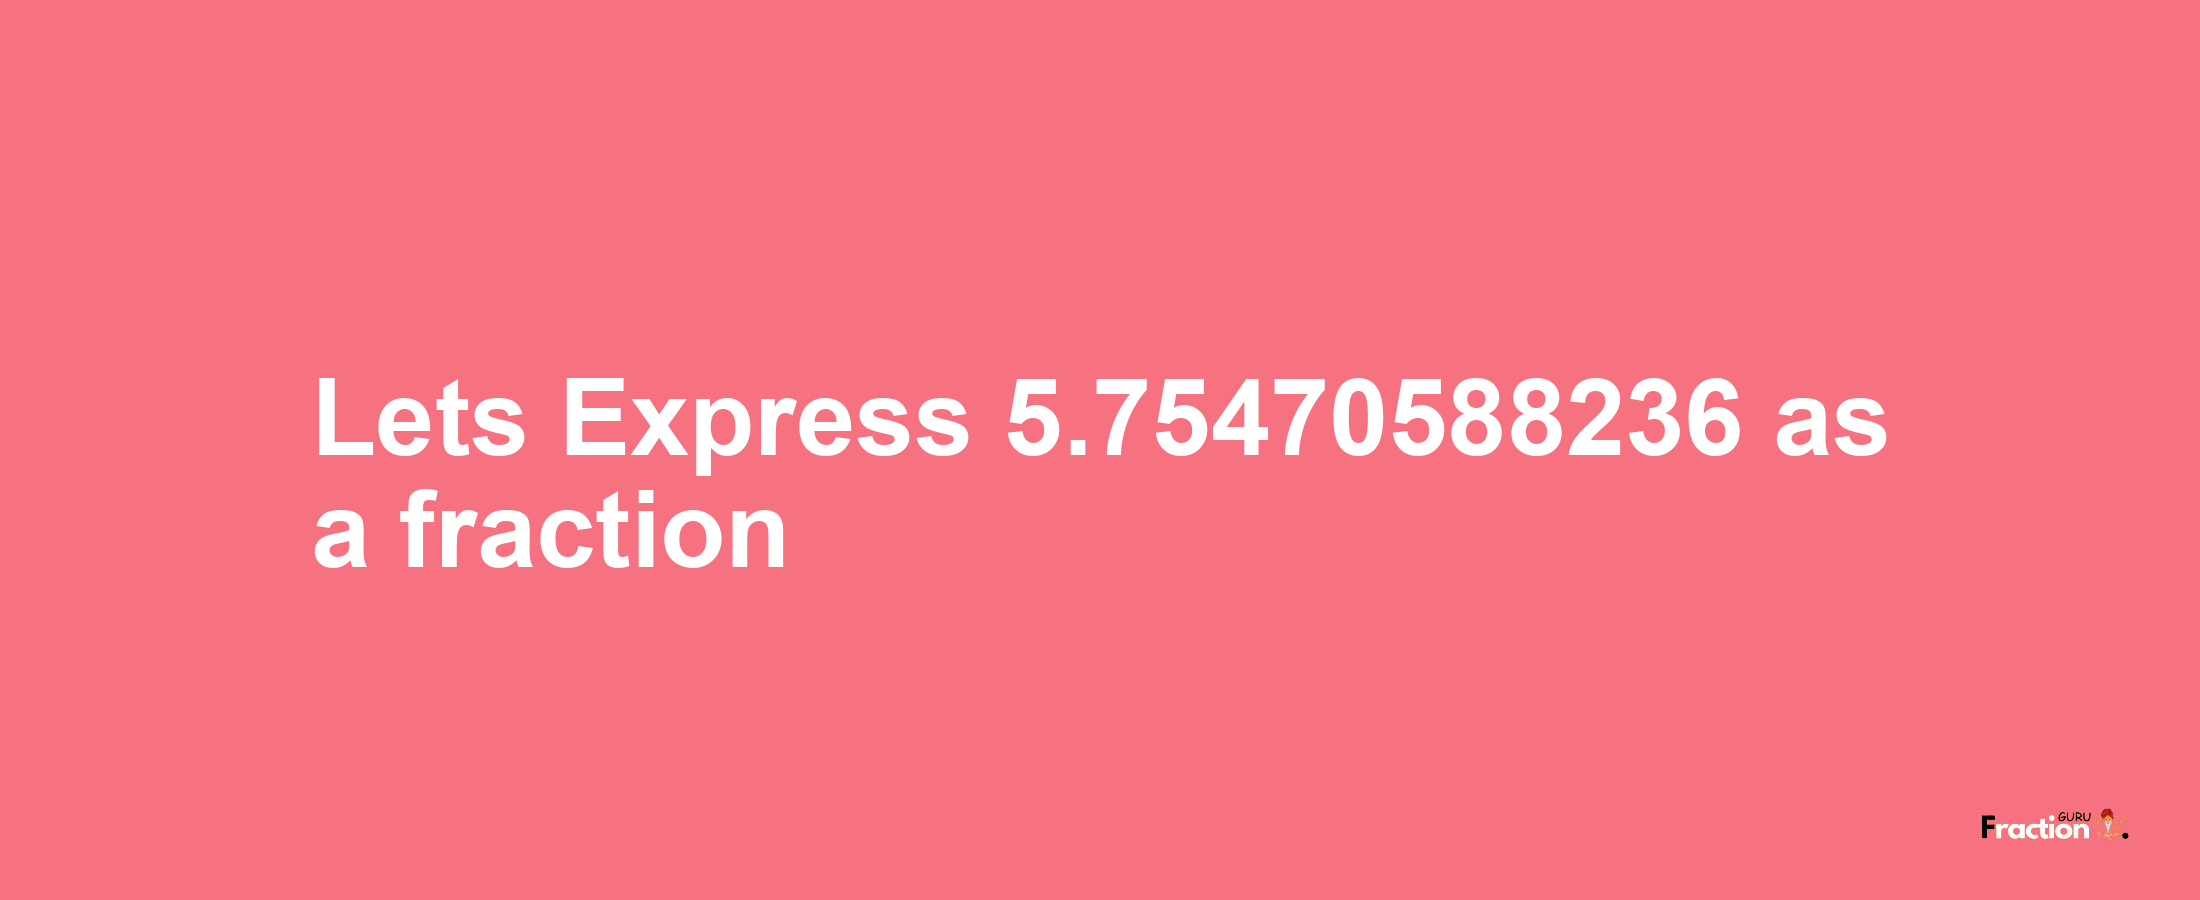 Lets Express 5.75470588236 as afraction